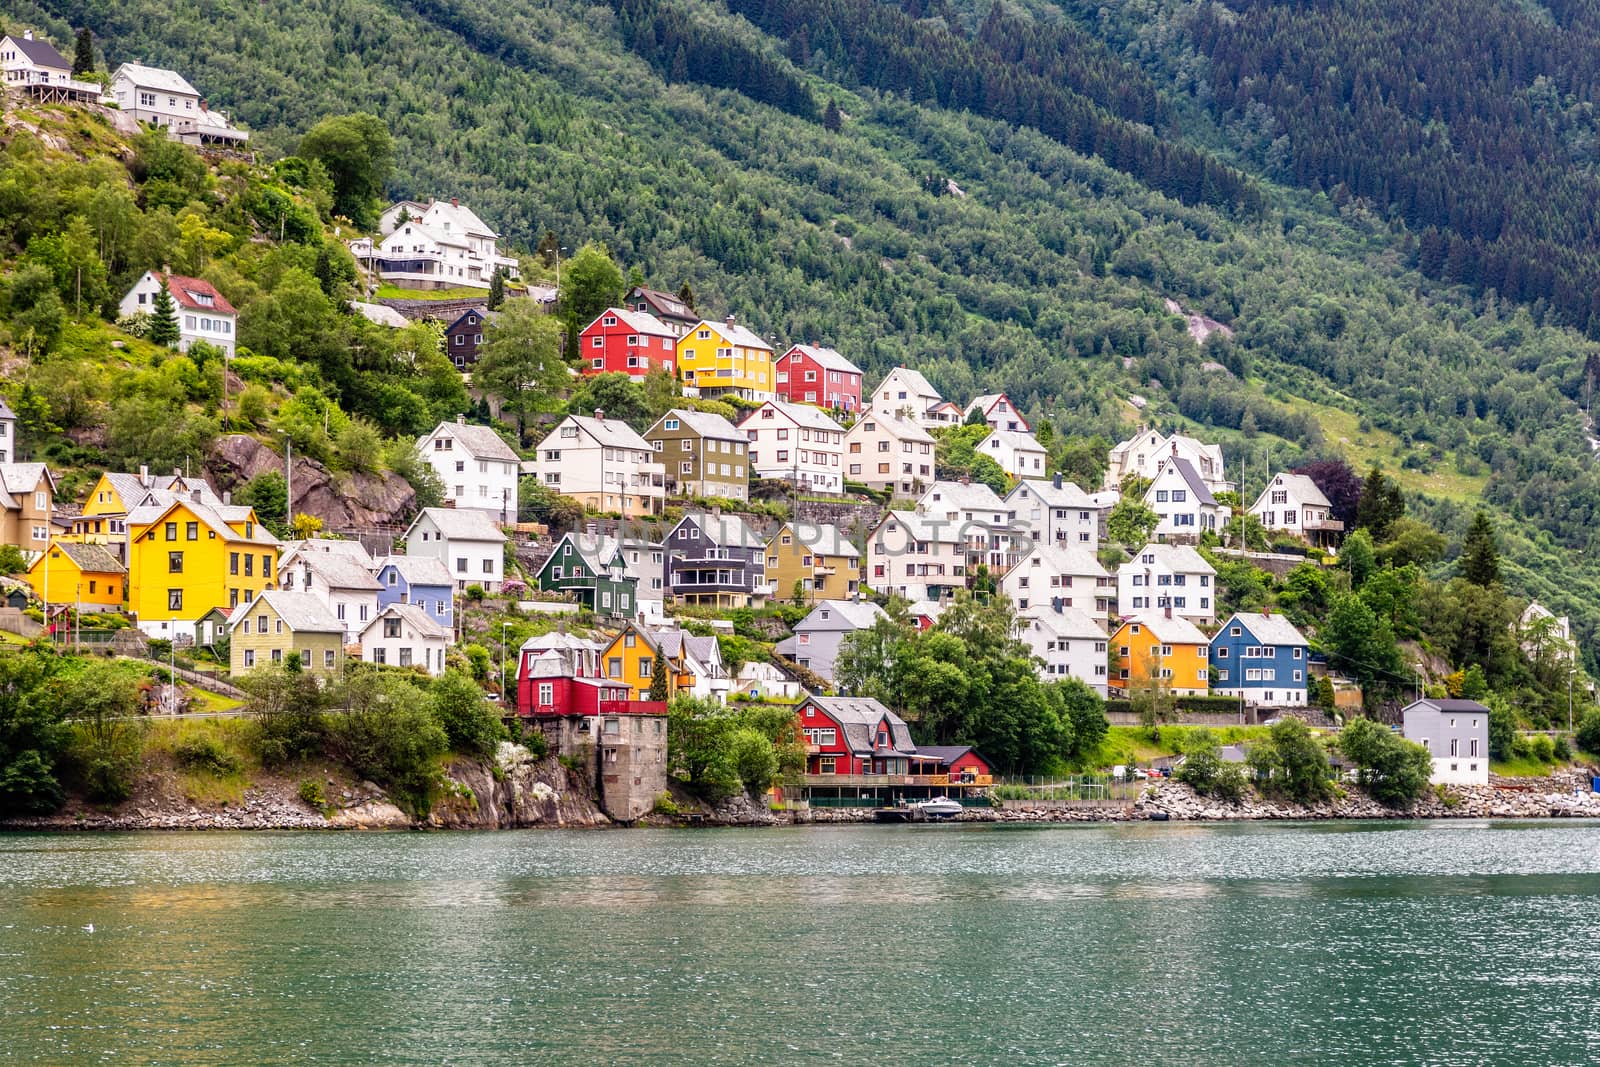 Colorful norwegian residential houses on the hill of Sorfjord, O by ambeon